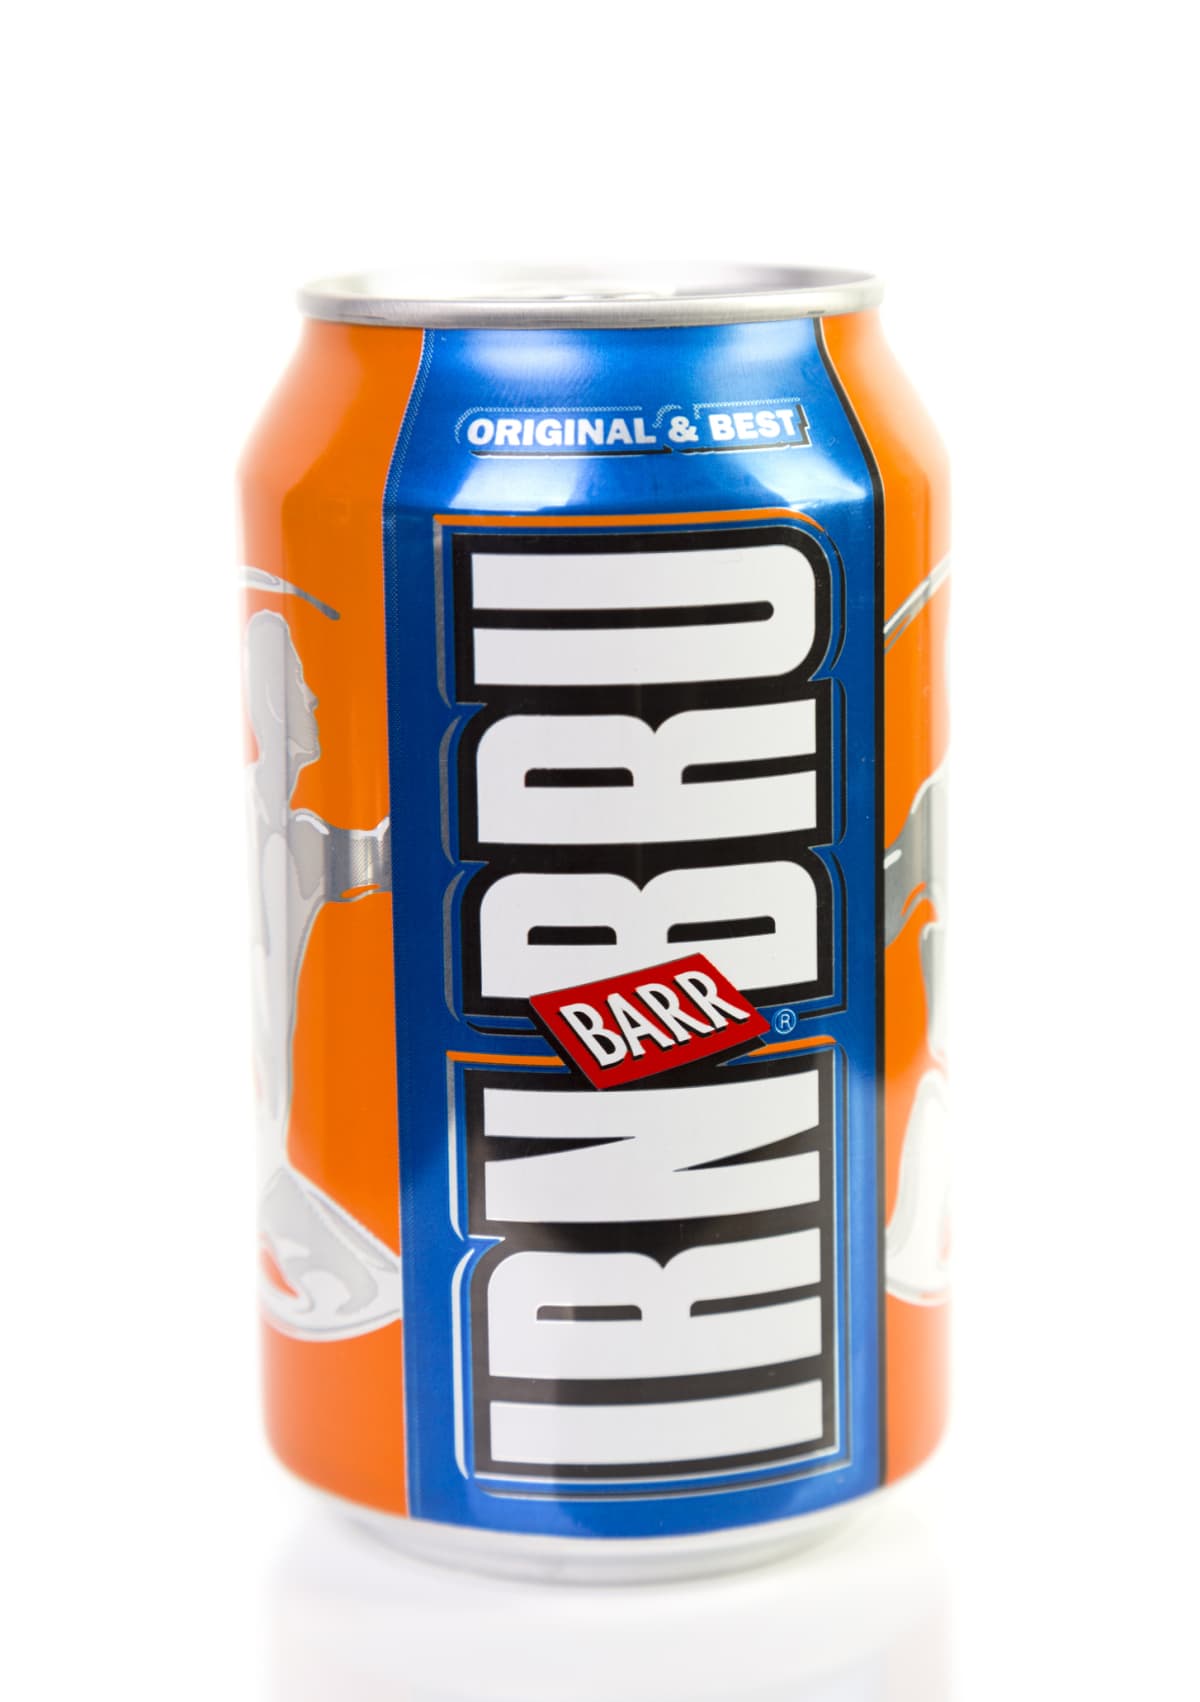 Glasgow, UK - April 21, 2013: A can of Barr's Irn Bru. Studio shot on a white background. Irn Bru is a carbonated caffeinated soft drink produced in Scotland since 1901. In Scotland it is the most popular soft drink, outselling Coca-Cola.